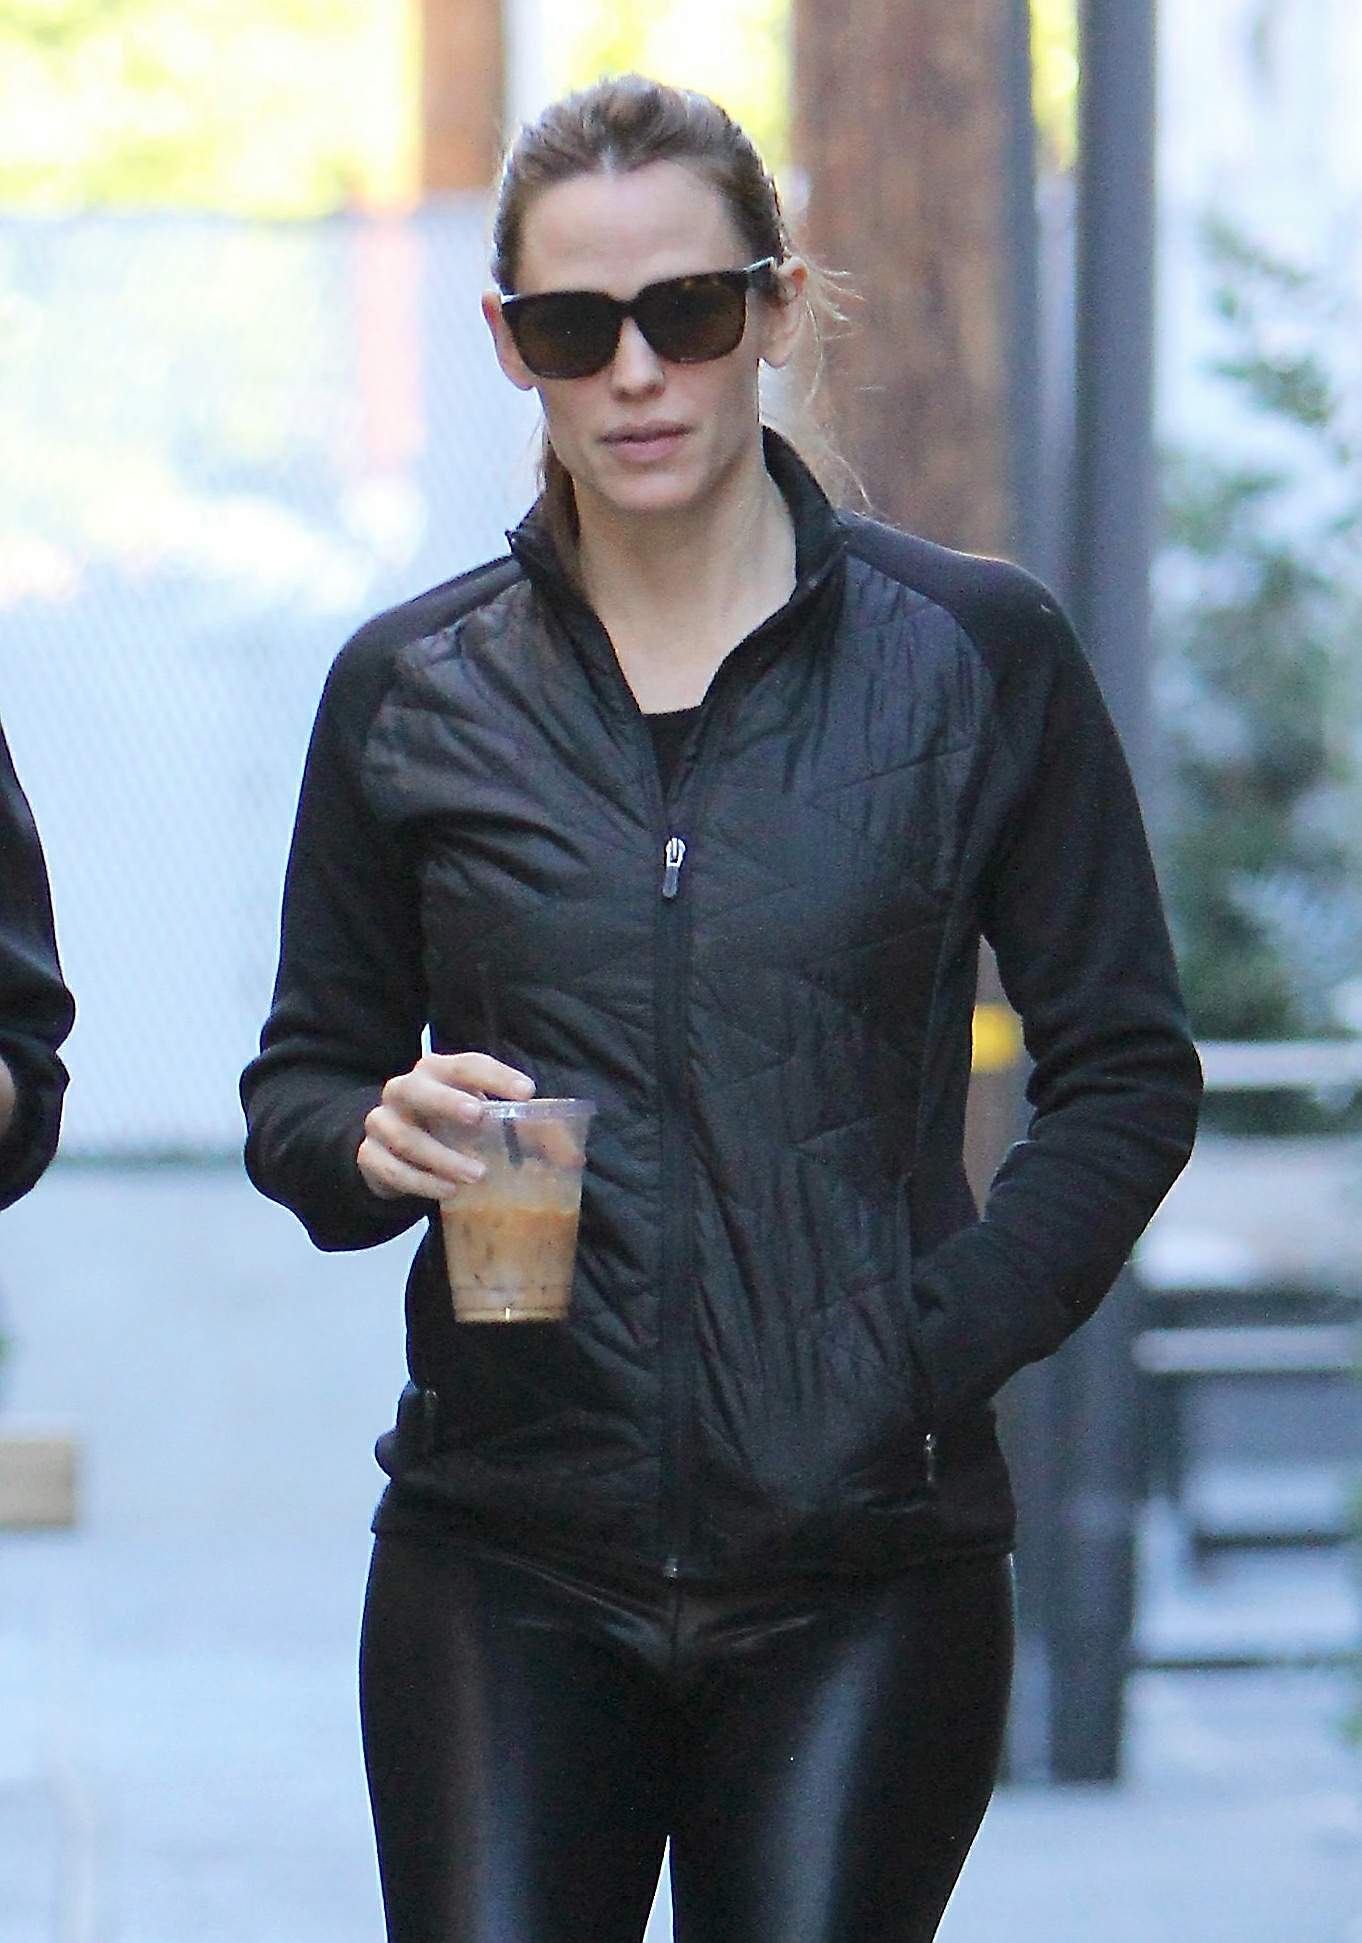 Jennifer Garner out and about in Brentwood